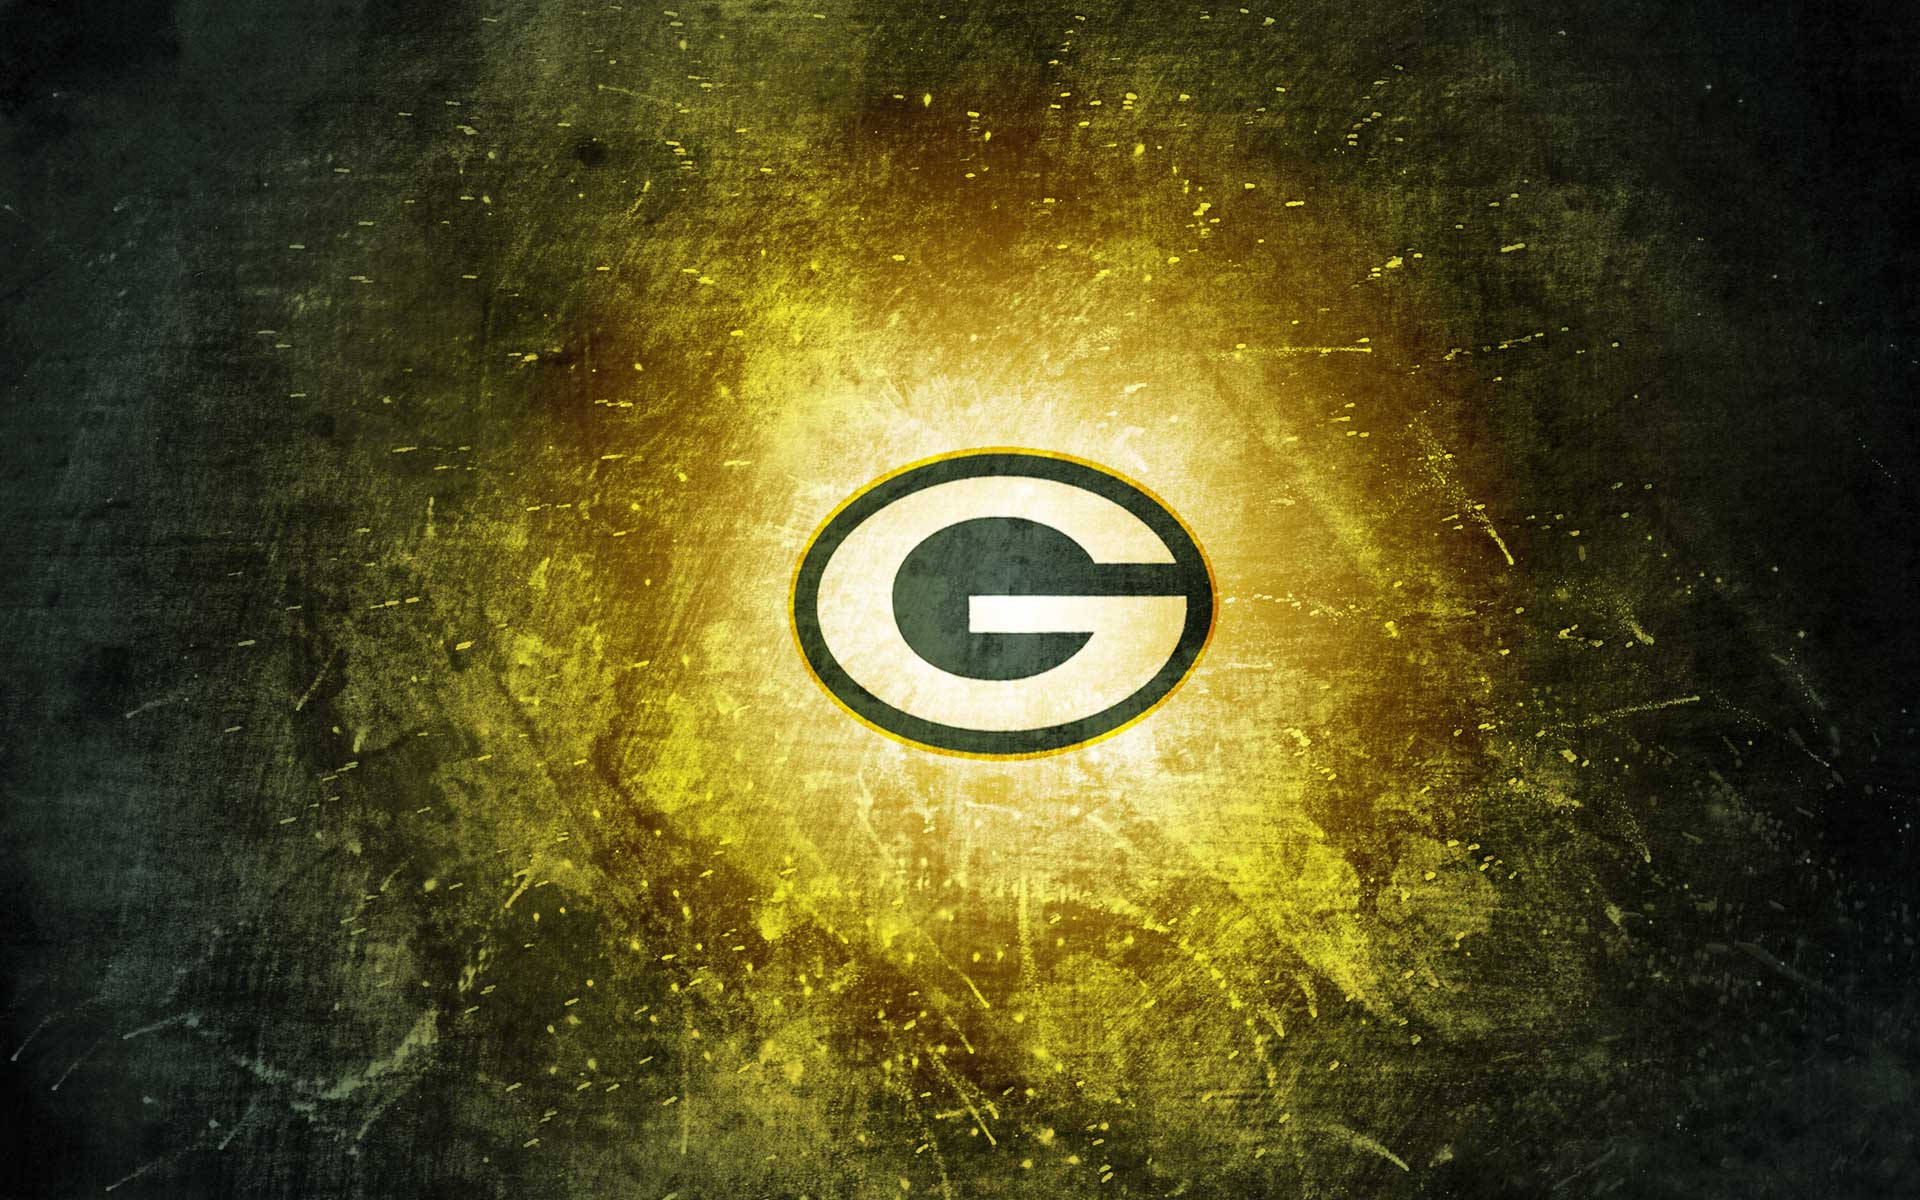 Green Bay Packers 1920X1200 Wallpaper and Background Image